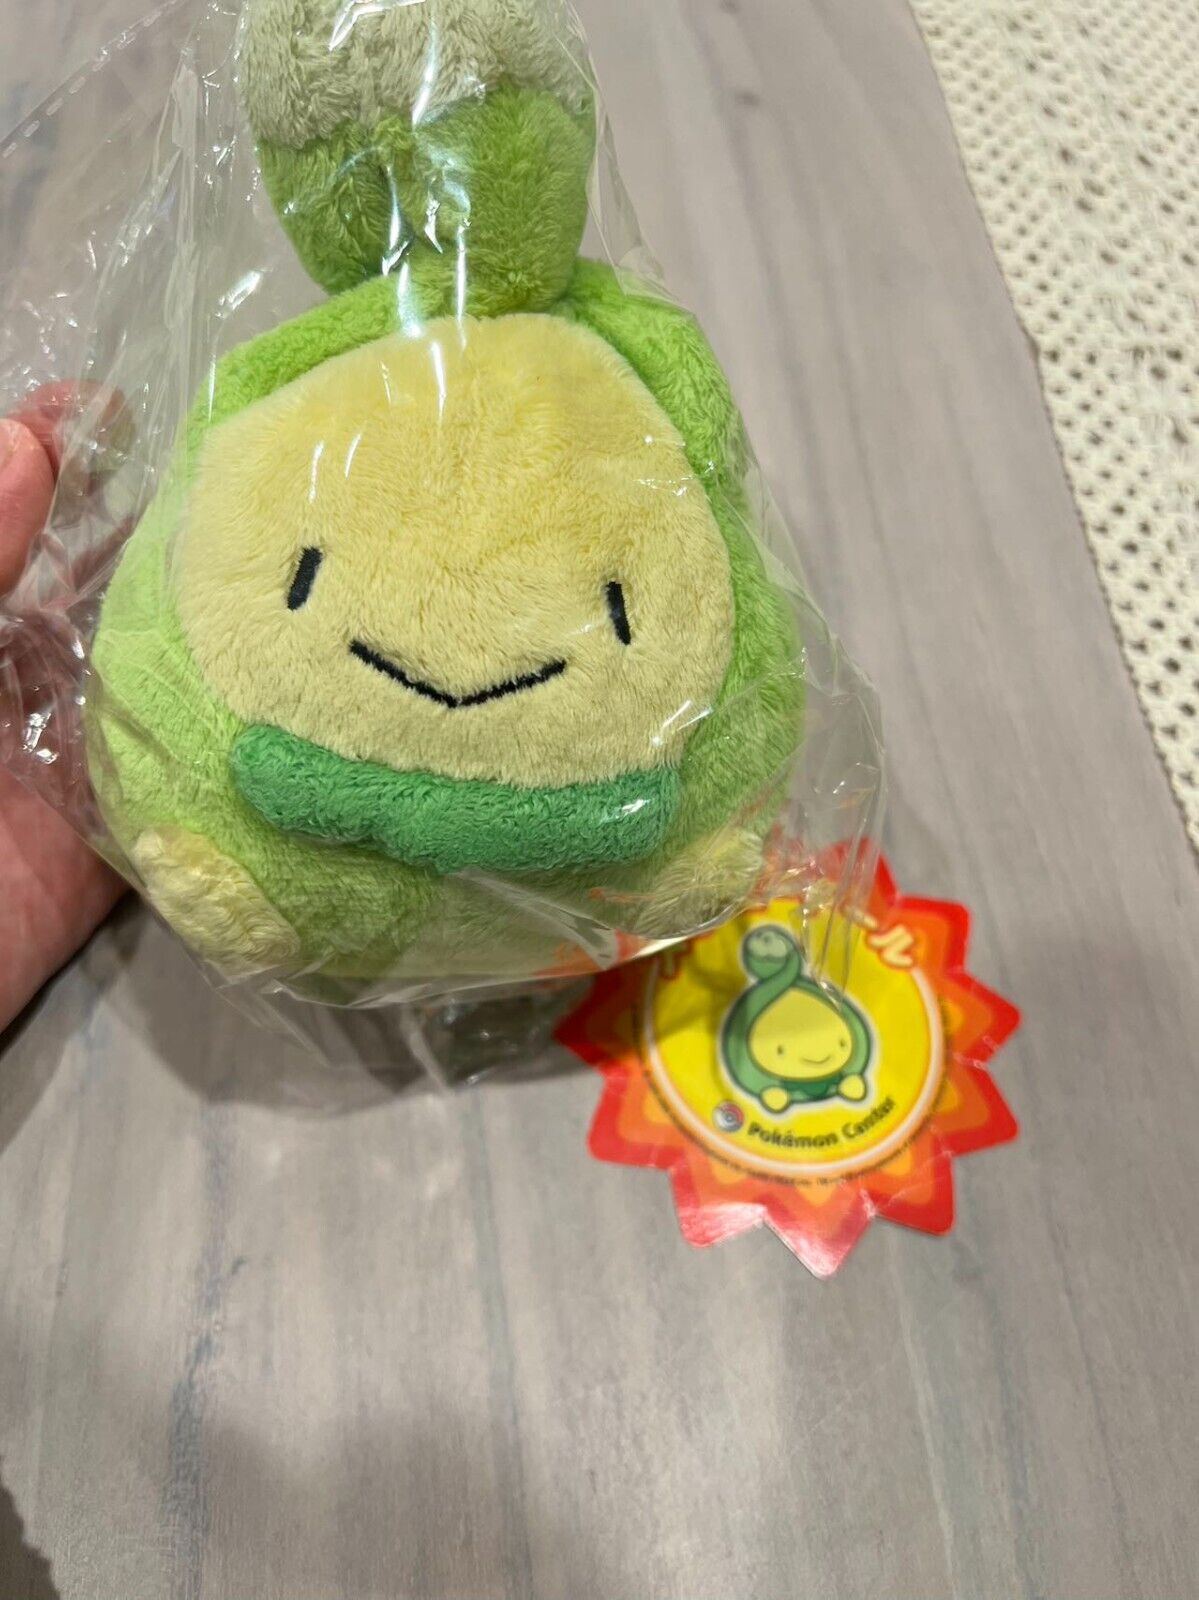 Rare 2009 Budew pokedoll for sale with Japanese hang tag